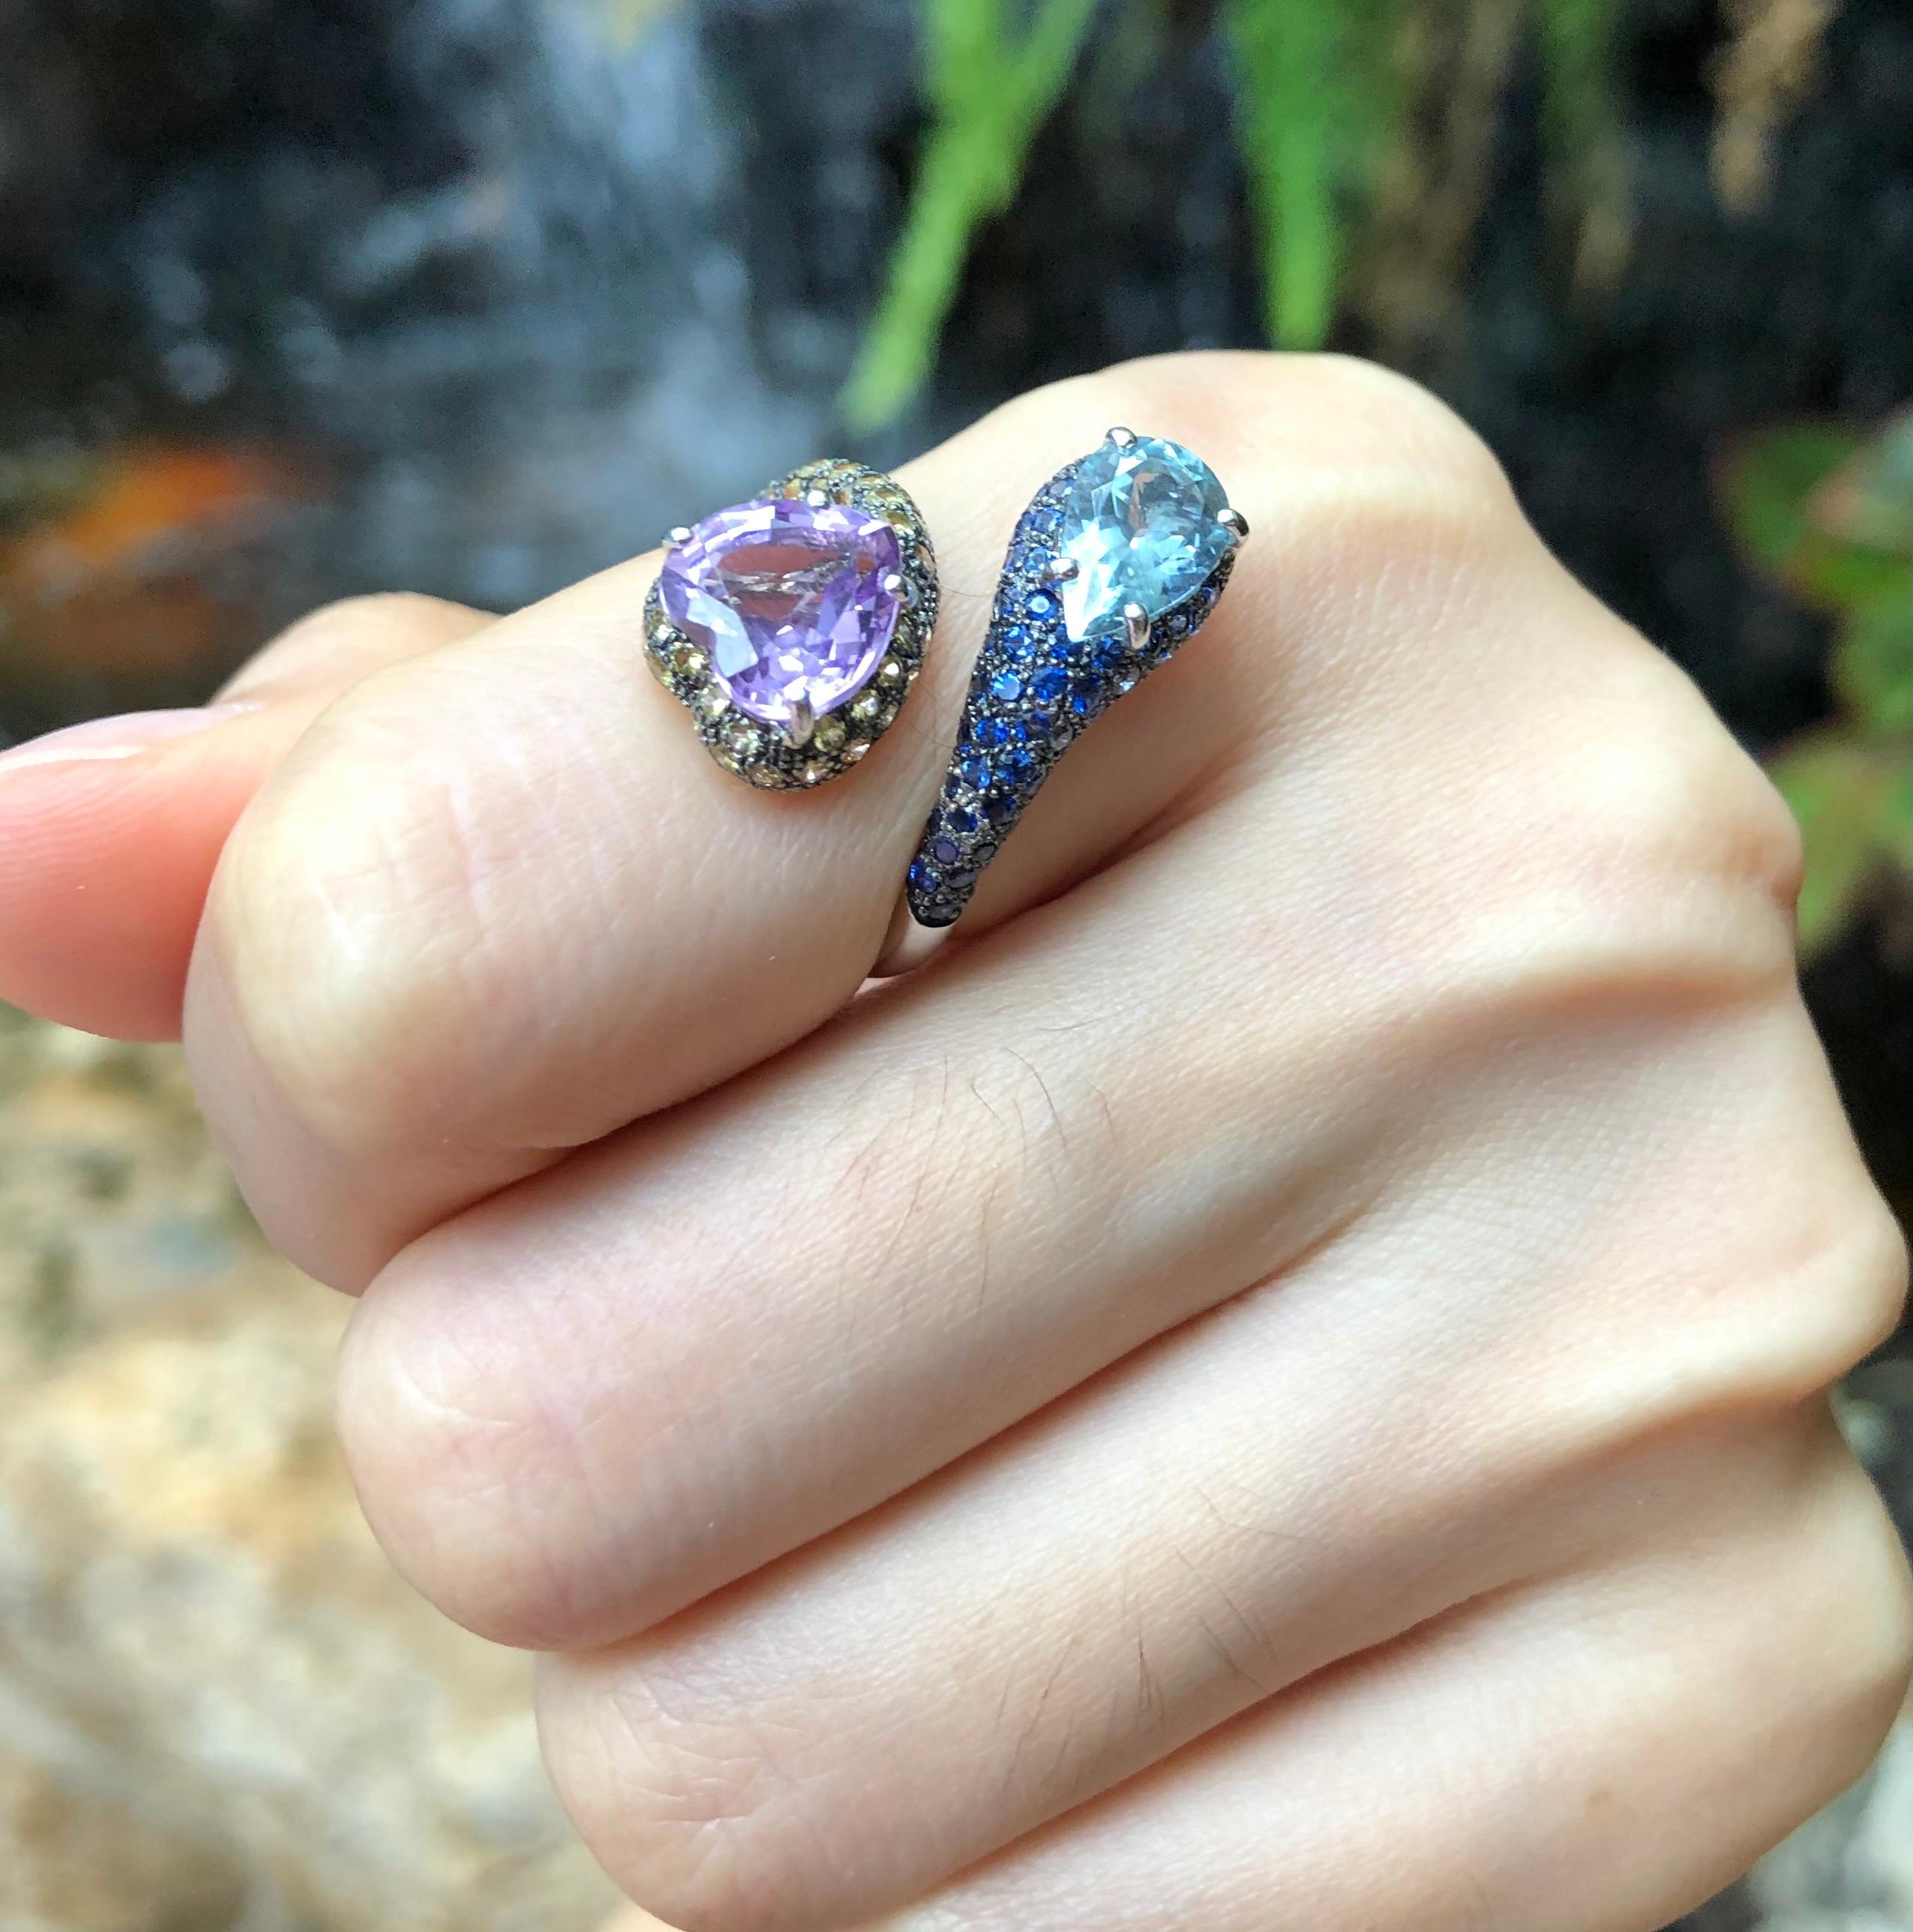 Amethyst 2.05 carats, Blue Topaz 1.15 carats with Yellow Sapphire 0.74 carat and Blue Sapphire 0.83 carat Ring set in 18 Karat White Gold Settings

Width:  1.9 cm 
Length:  2.2 cm
Ring Size: 50
Total Weight: 5.87 grams

